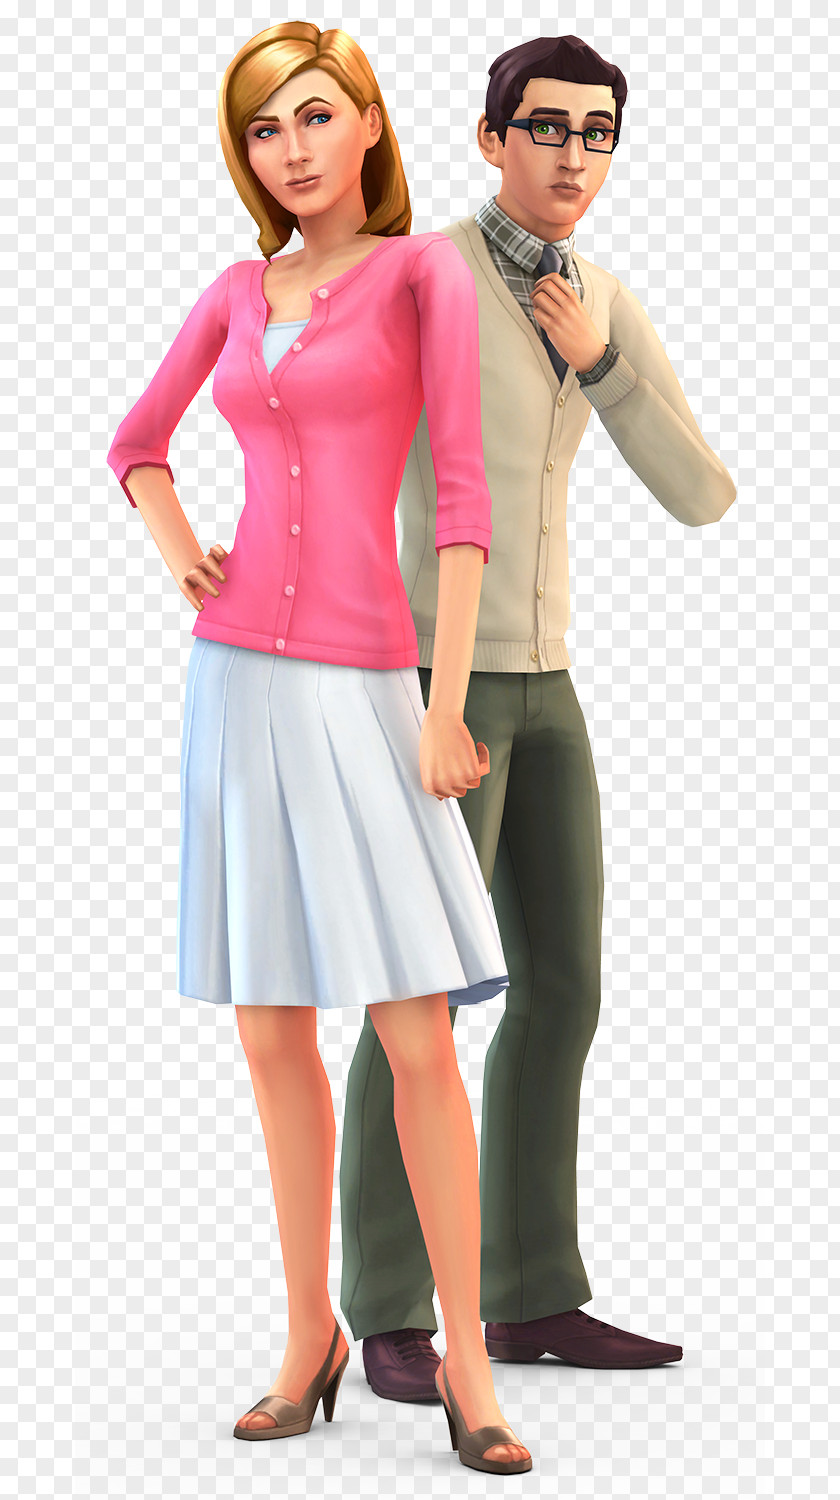 Personage The Sims 4 3 SteelSeries PNG